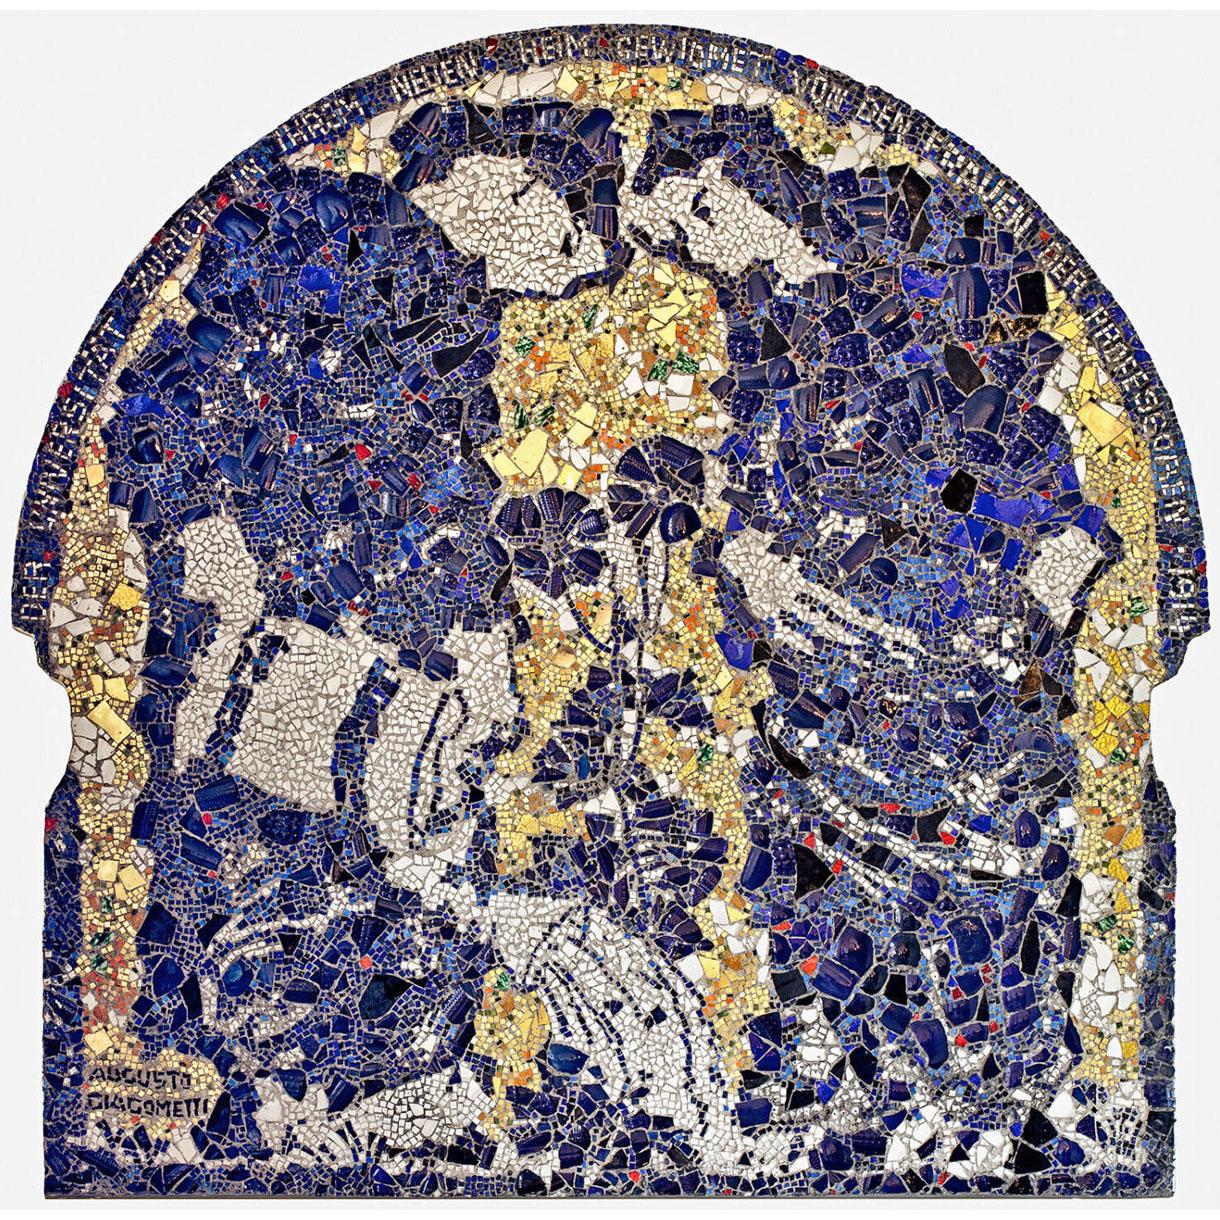 Augusto Giacometti. Becoming. 1914. Mosaic in the University of Zurich